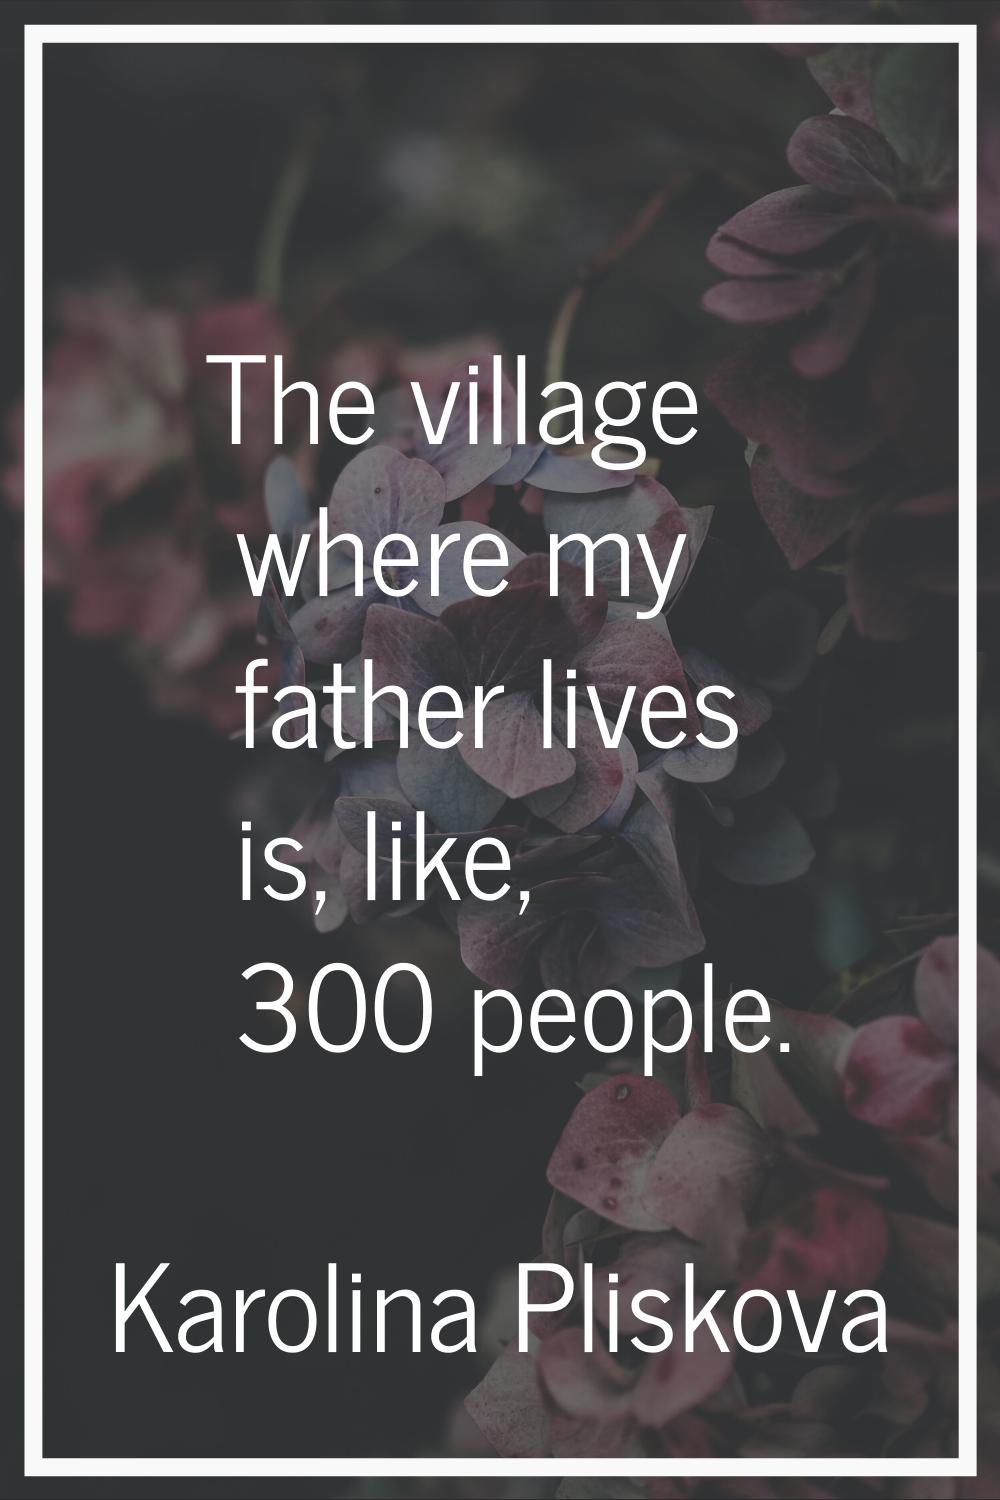 The village where my father lives is, like, 300 people.